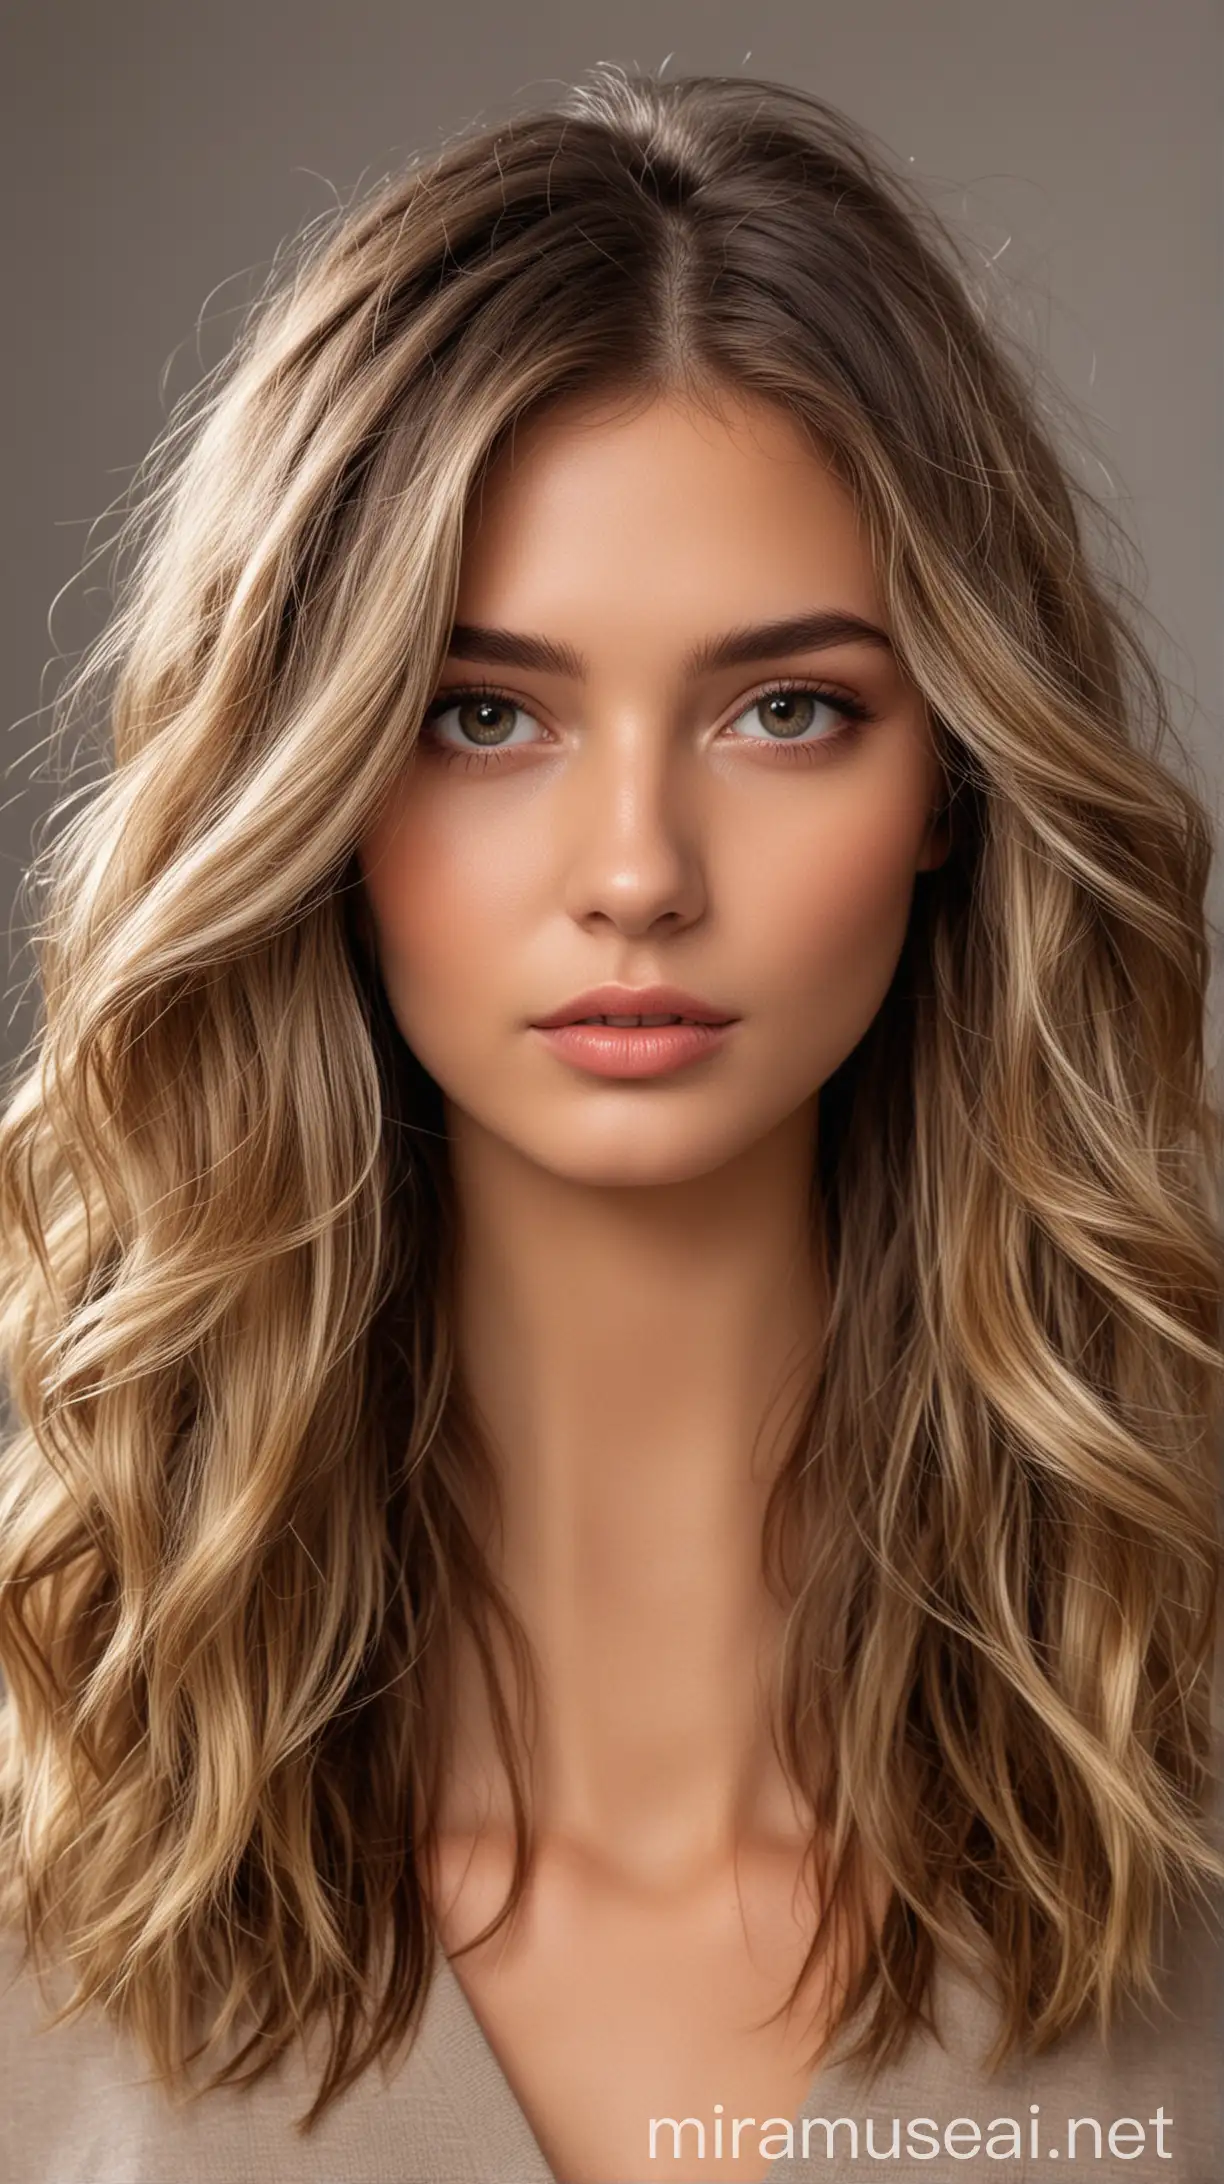 Spectacular model with balayage hair